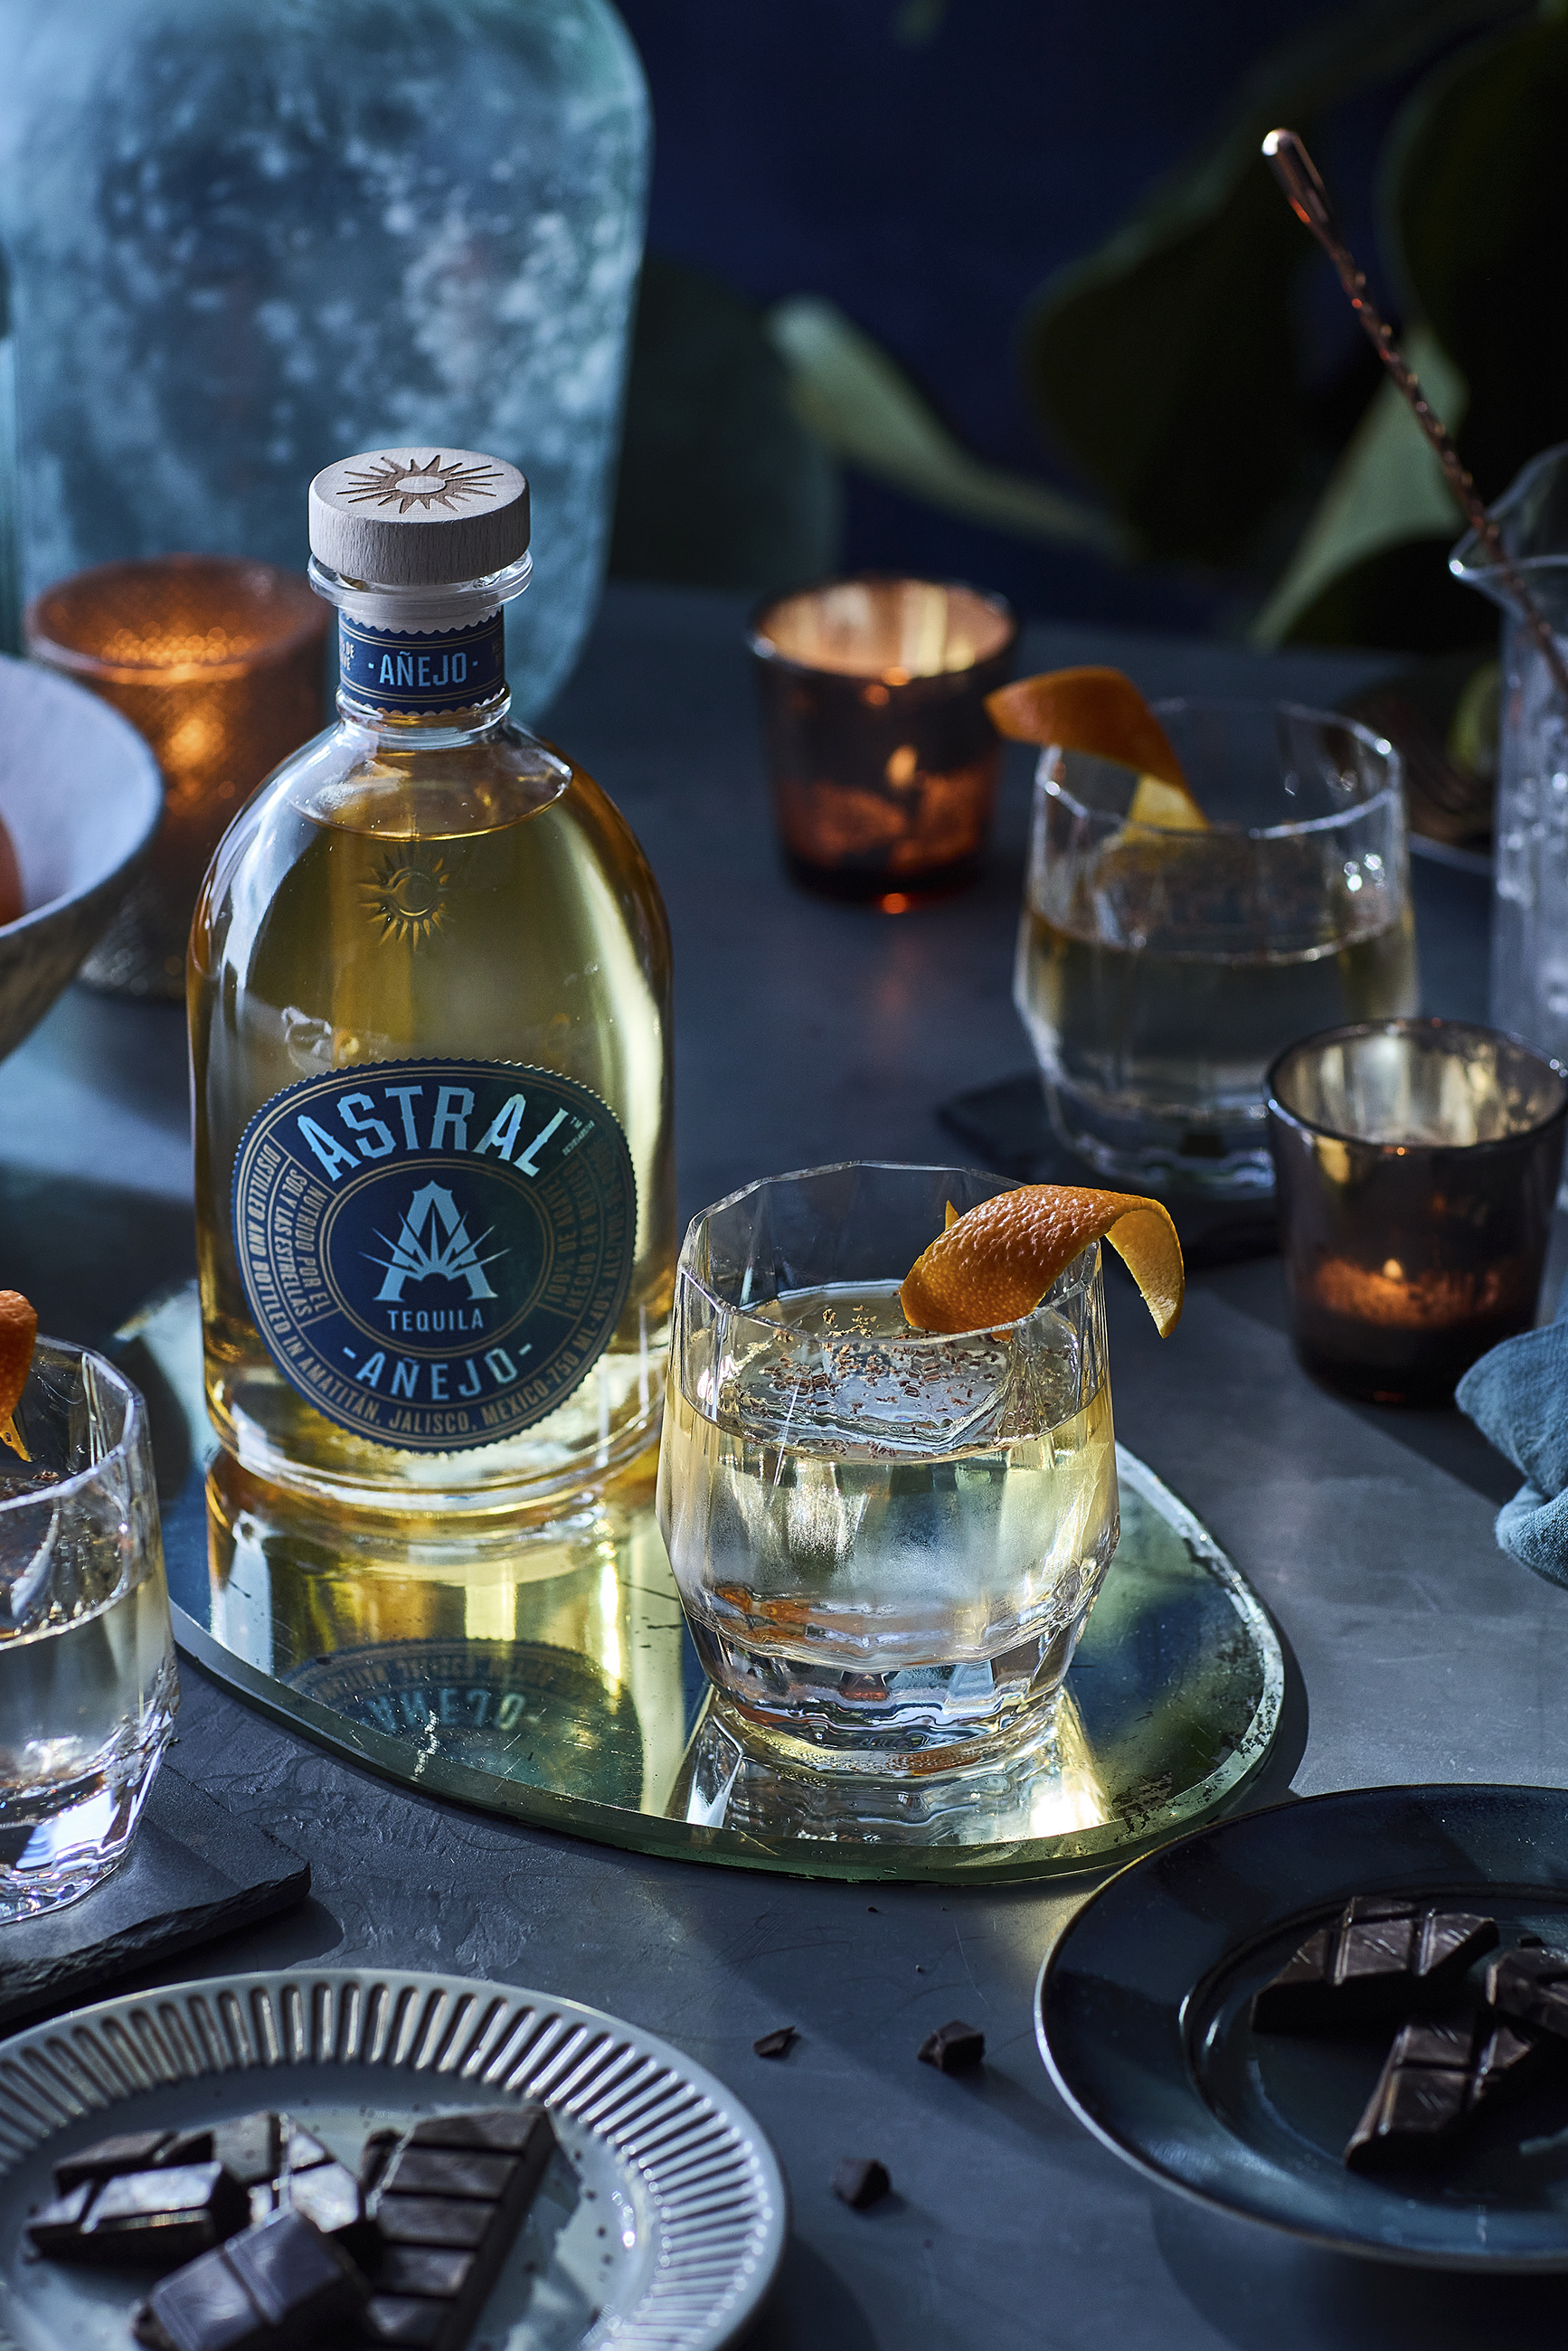 Astral's Añejo is perfect to enjoy neat, on the rocks or as the main spirit to provide a delicious twist on unexpected classics, such as the Astral Old Fashioned.